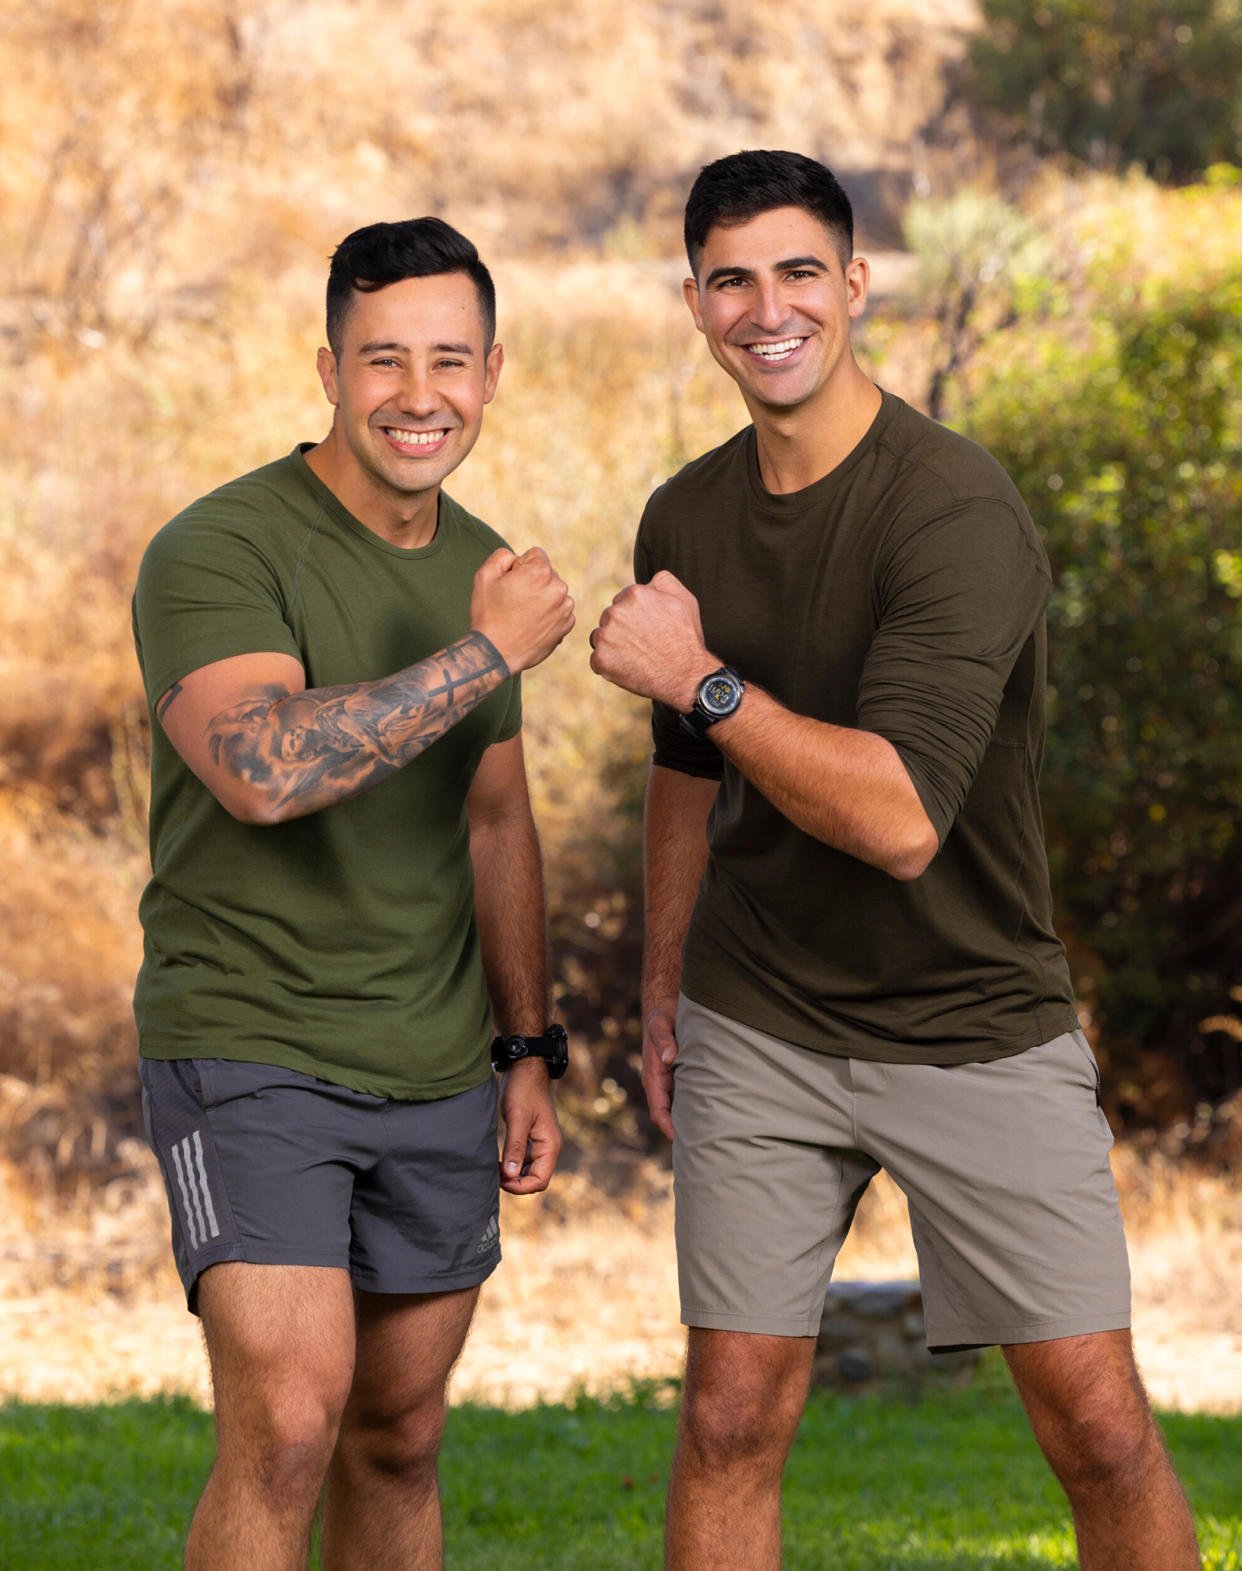 Shane Bilek Says ‘The Amazing Race’ Made Him and Juan ‘Better Husbands’: ‘God Bless the Wives’